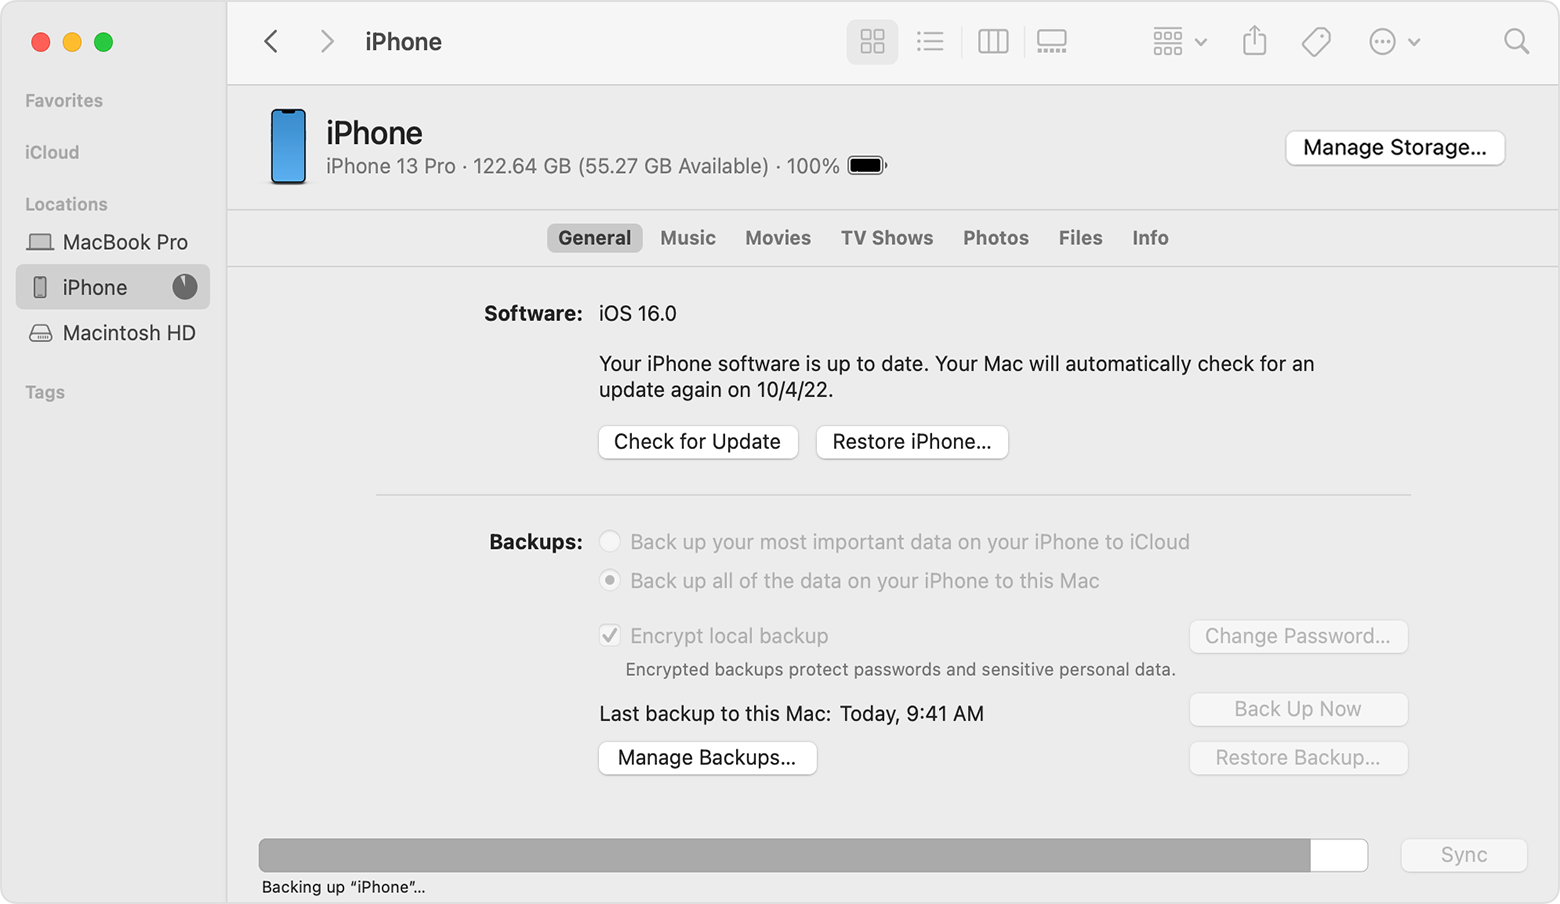 A Finder window showing an iPhone backup in progress.